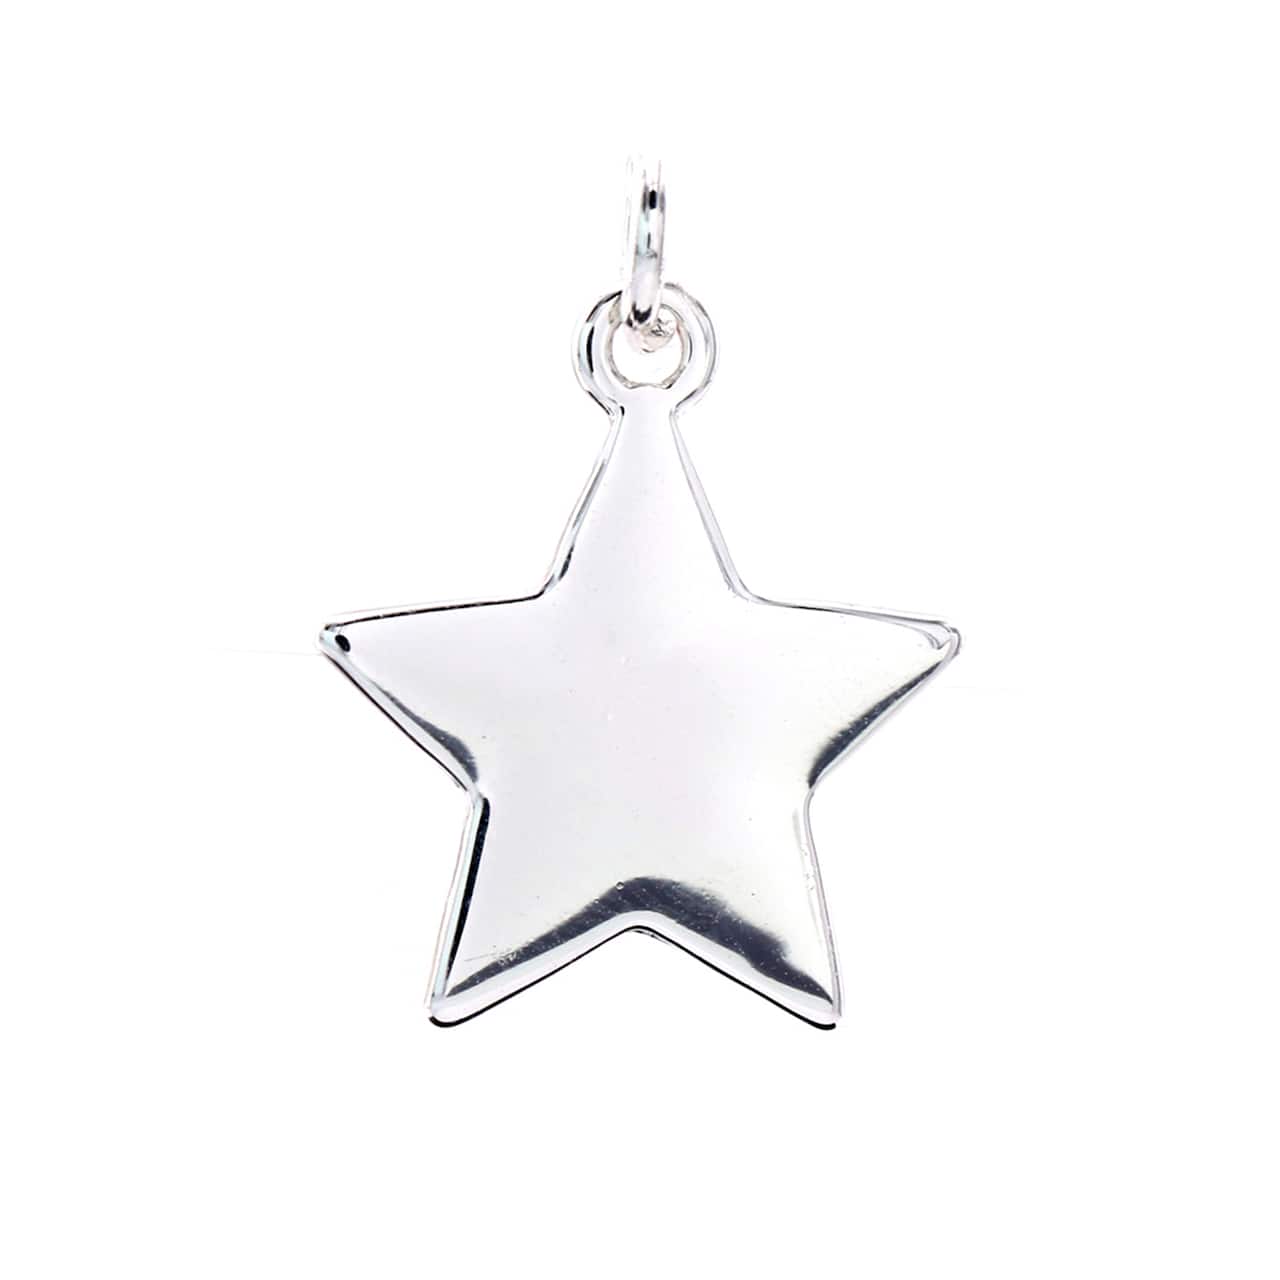 Charmalong™ Silver Plated Star Charm by Bead Landing™